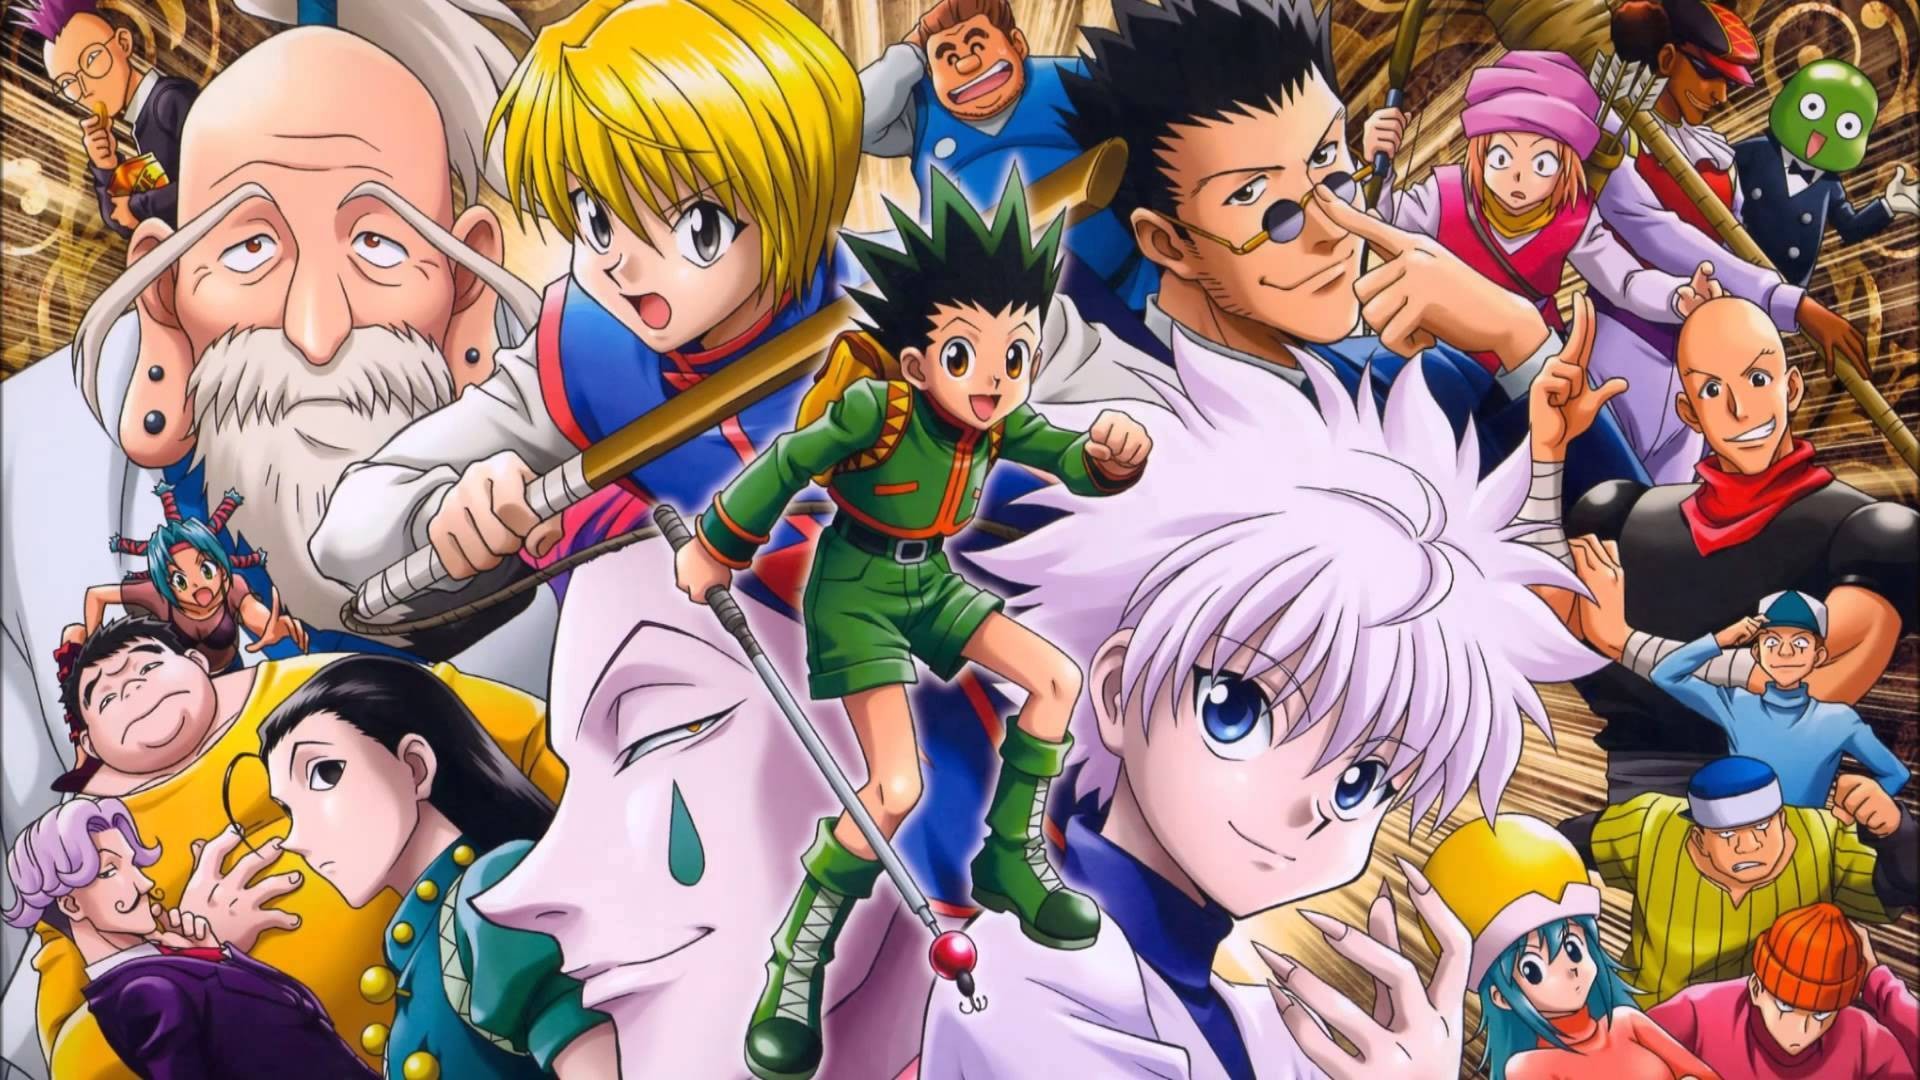 Gon And Killua Wallpaper with high-resolution 1920x1080 pixel. You can use this poster wallpaper for your Desktop Computers, Mac Screensavers, Windows Backgrounds, iPhone Wallpapers, Tablet or Android Lock screen and another Mobile device